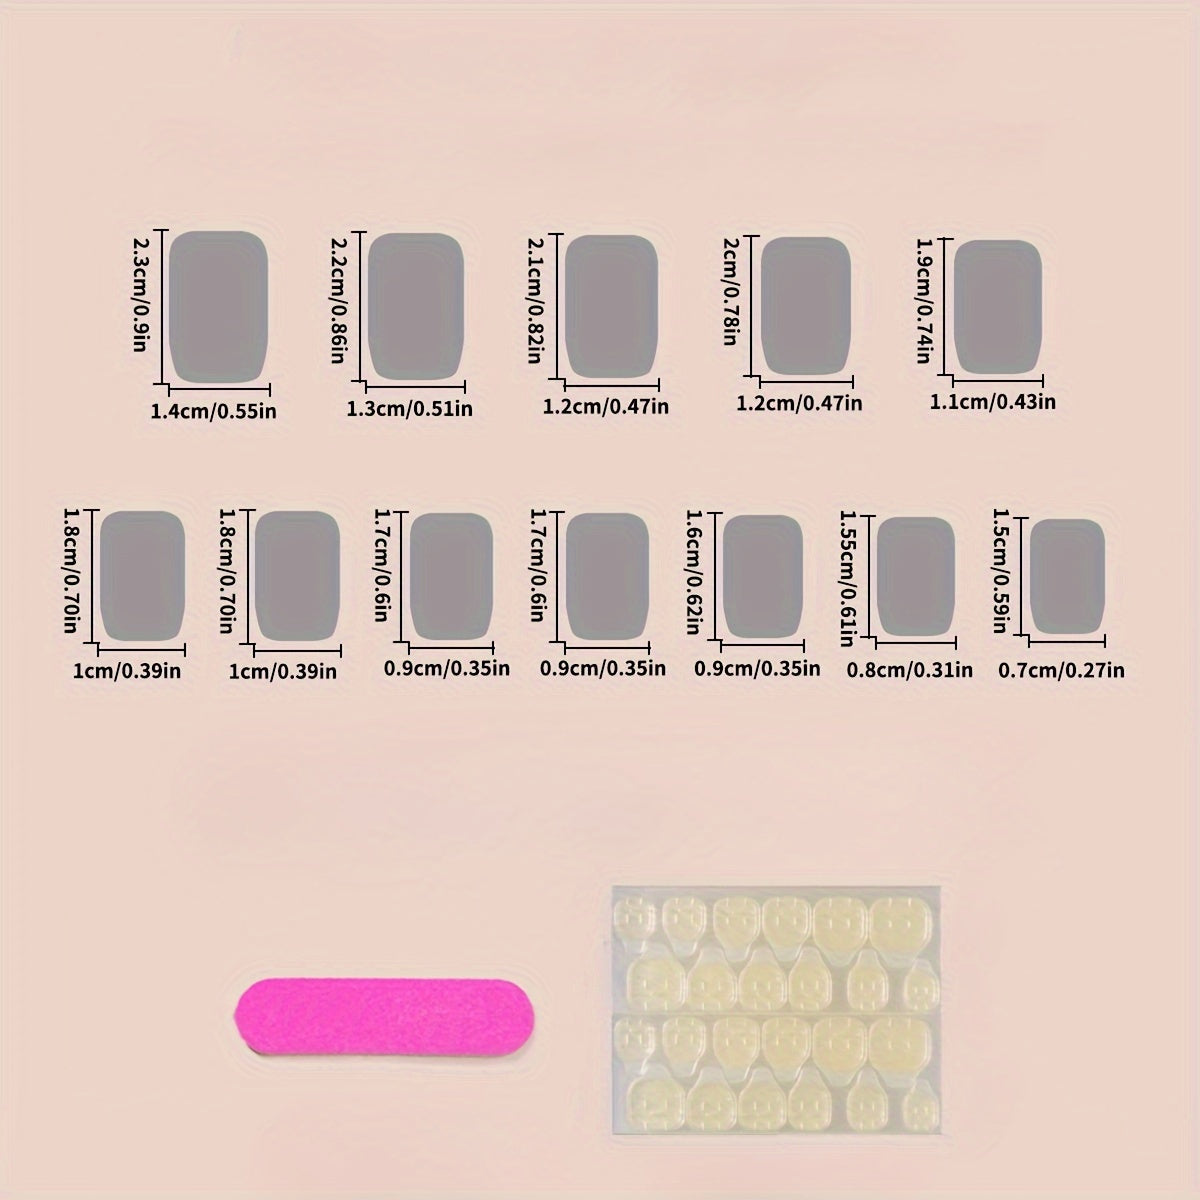 24-Piece Nude Pink Heart Design Press-On Nails Set with File & Adhesive